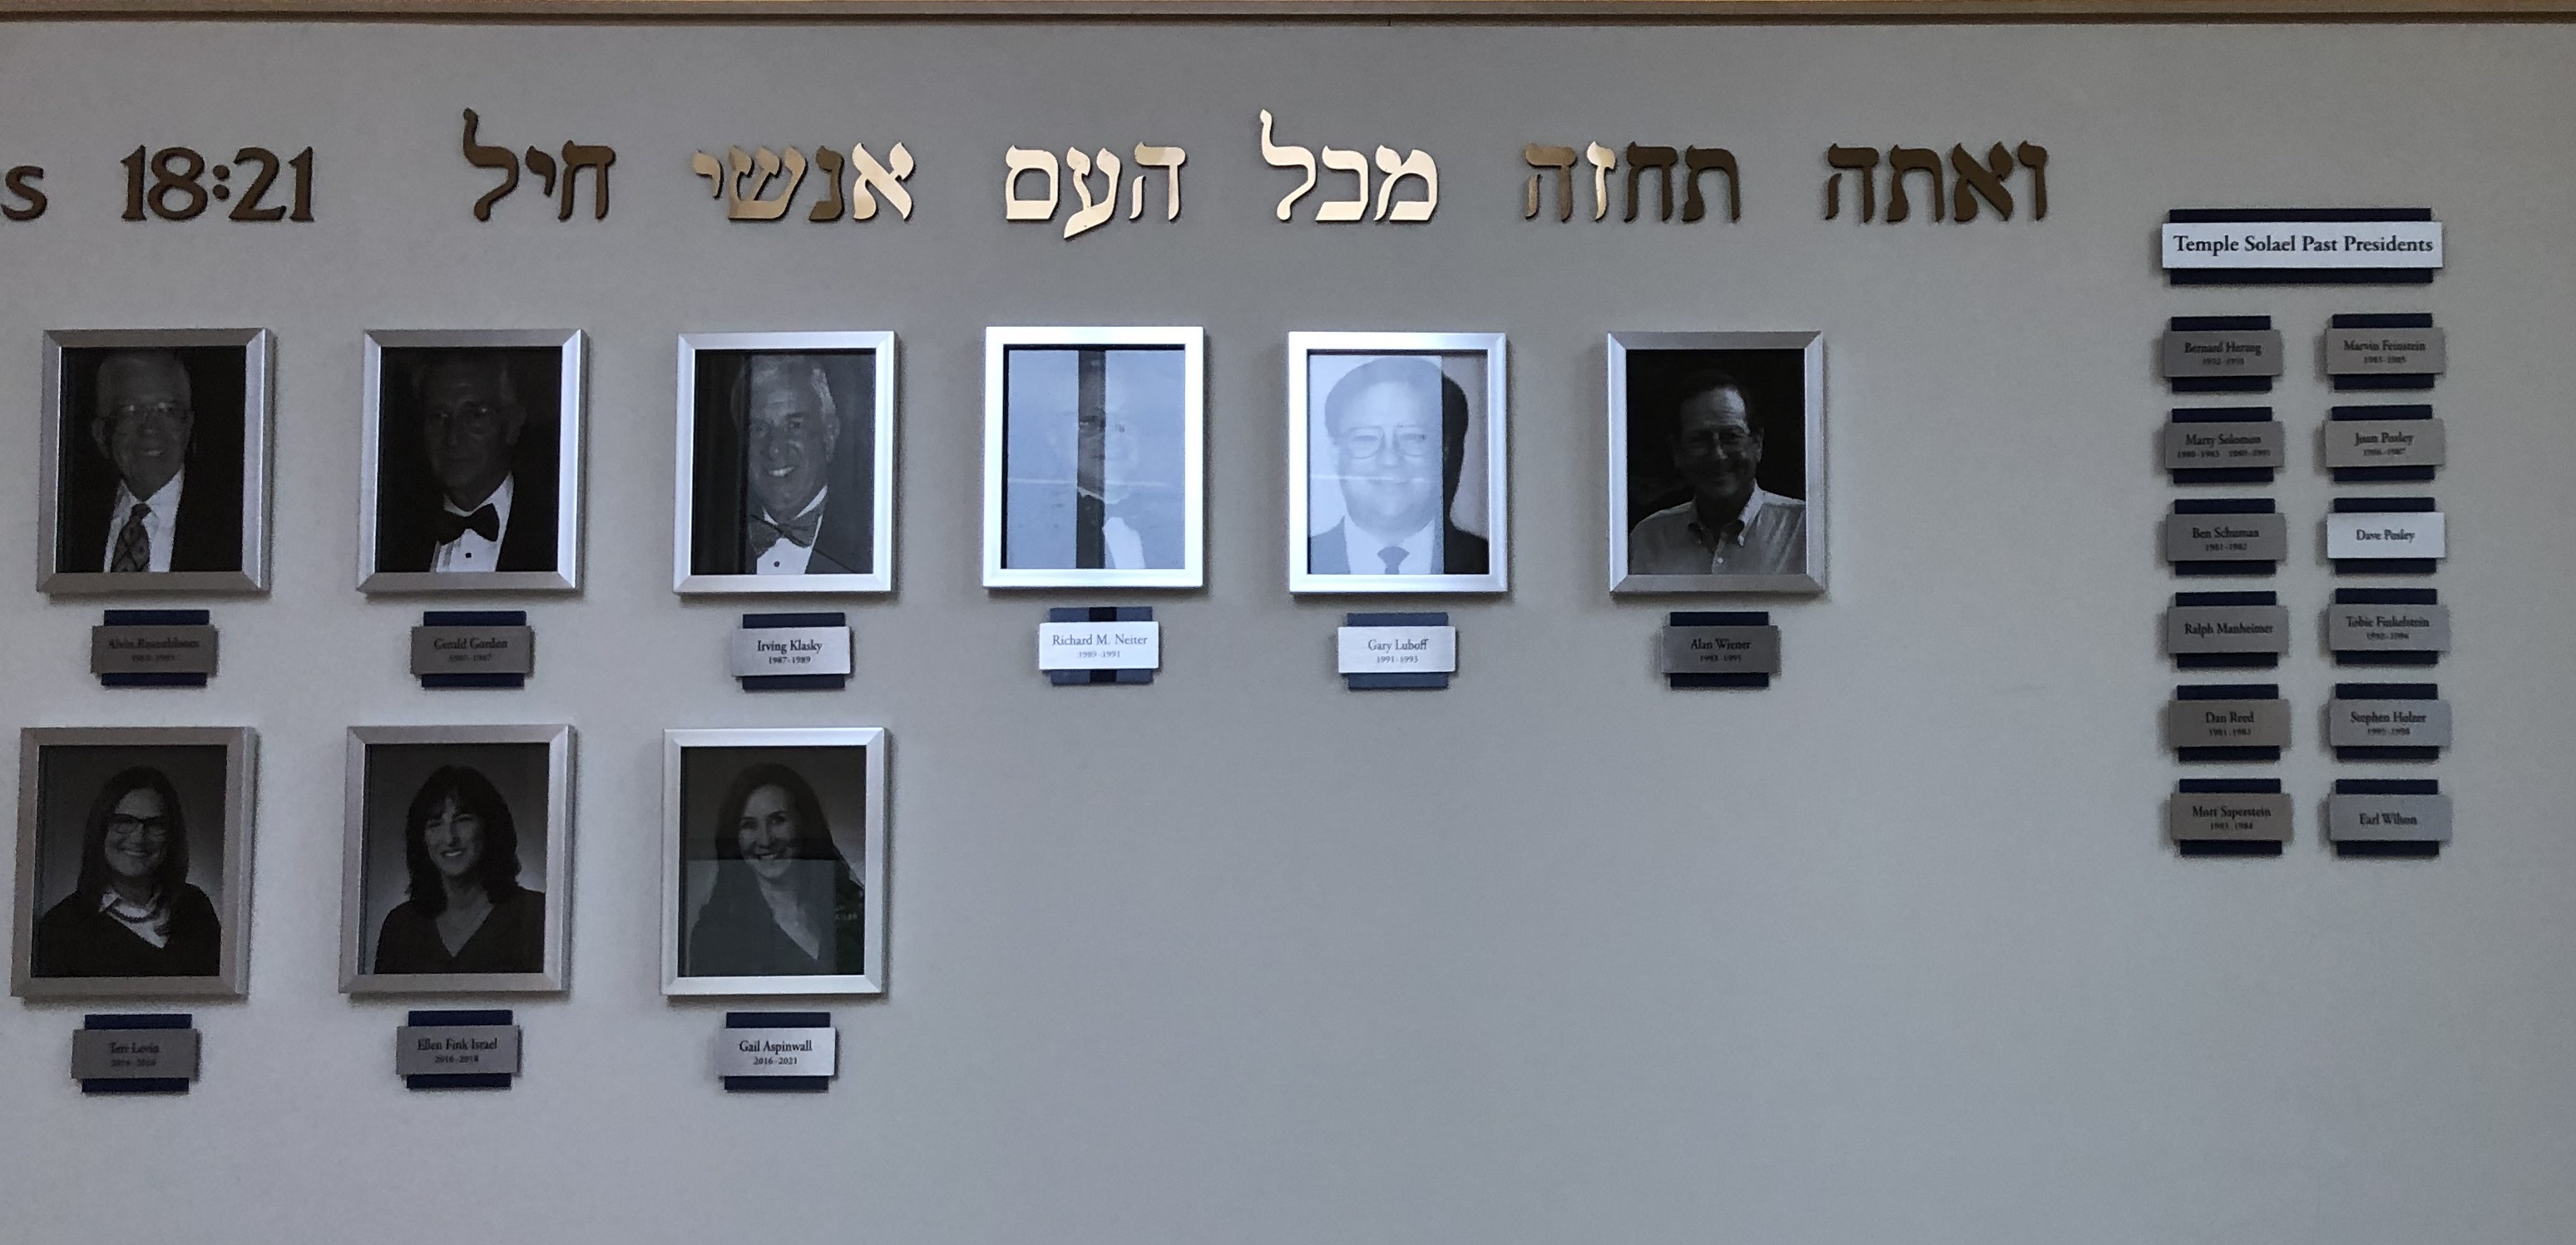 Temple Judea's President's Wall. The Tarzana synagogue honors those who served in the distinct position with this commemoration wall.